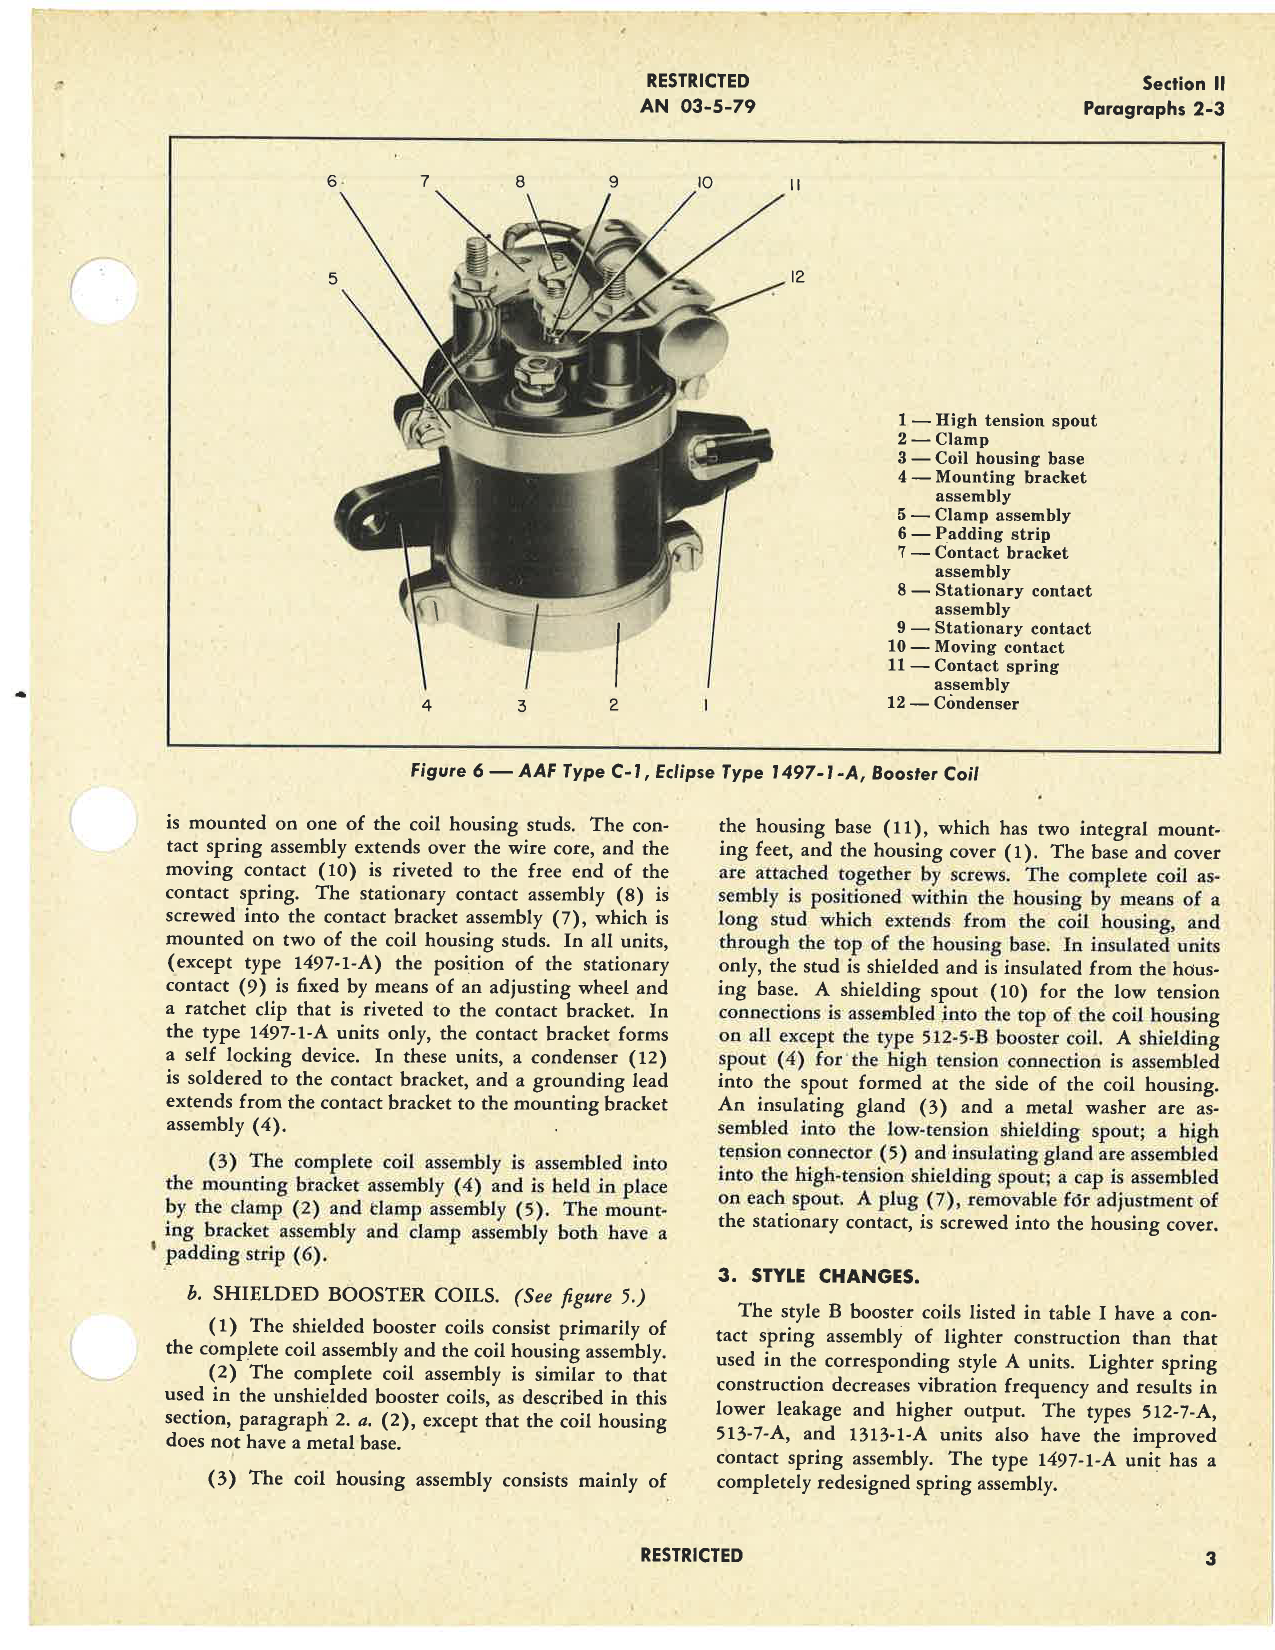 Sample page 7 from AirCorps Library document: Operation, Service & Overhaul Instructions with Parts Catalog for High Tension Booster Coils